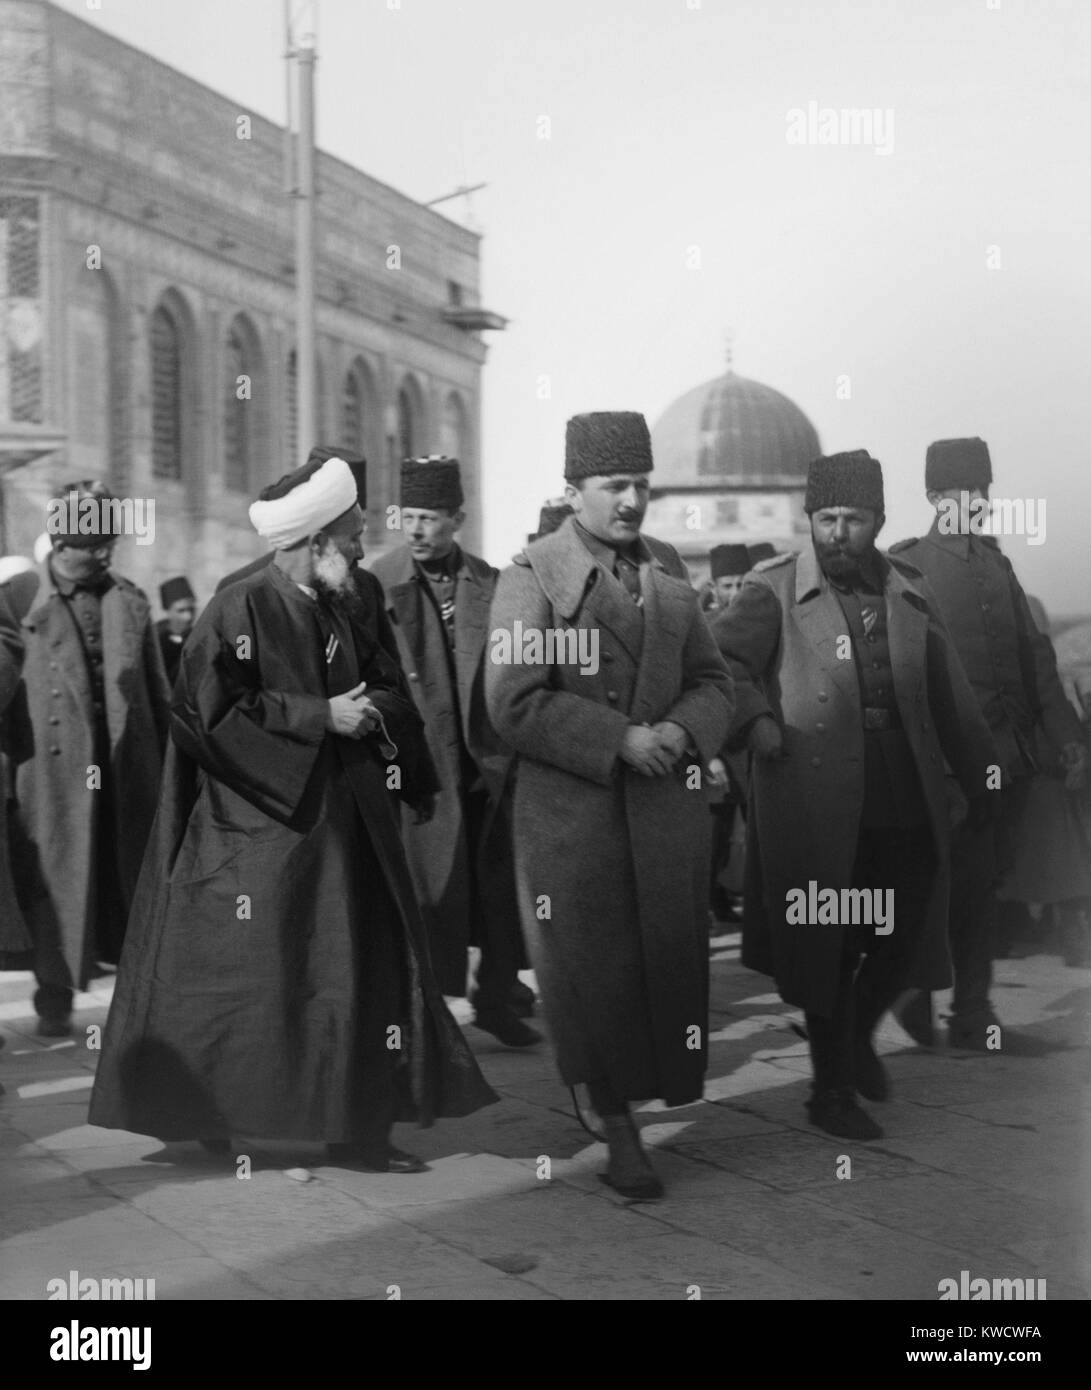 Enver Pasha (center) and Cemal Pasha (center right) in Jerusalem in 1916, at the Dome of the Rock. Enver, as Minister of War, was the main leader of Turkey from 1914-1918. Cemal lead the Ottoman army against British forces in Egypt in WW1 (BSLOC 2017 1 109) Stock Photo